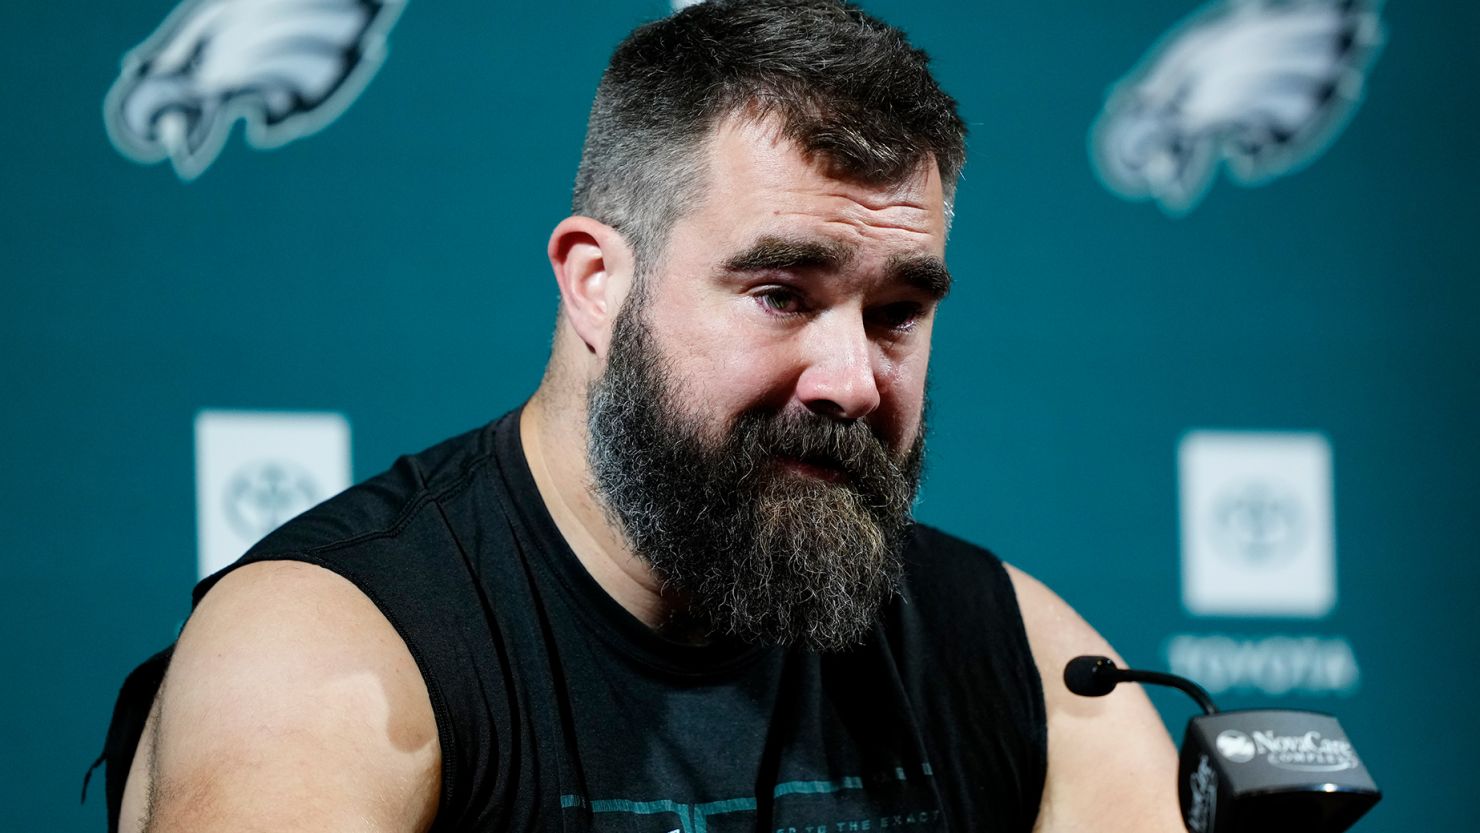 At Jason’s Kelce’s retirement, he shares how to be a good father CNN